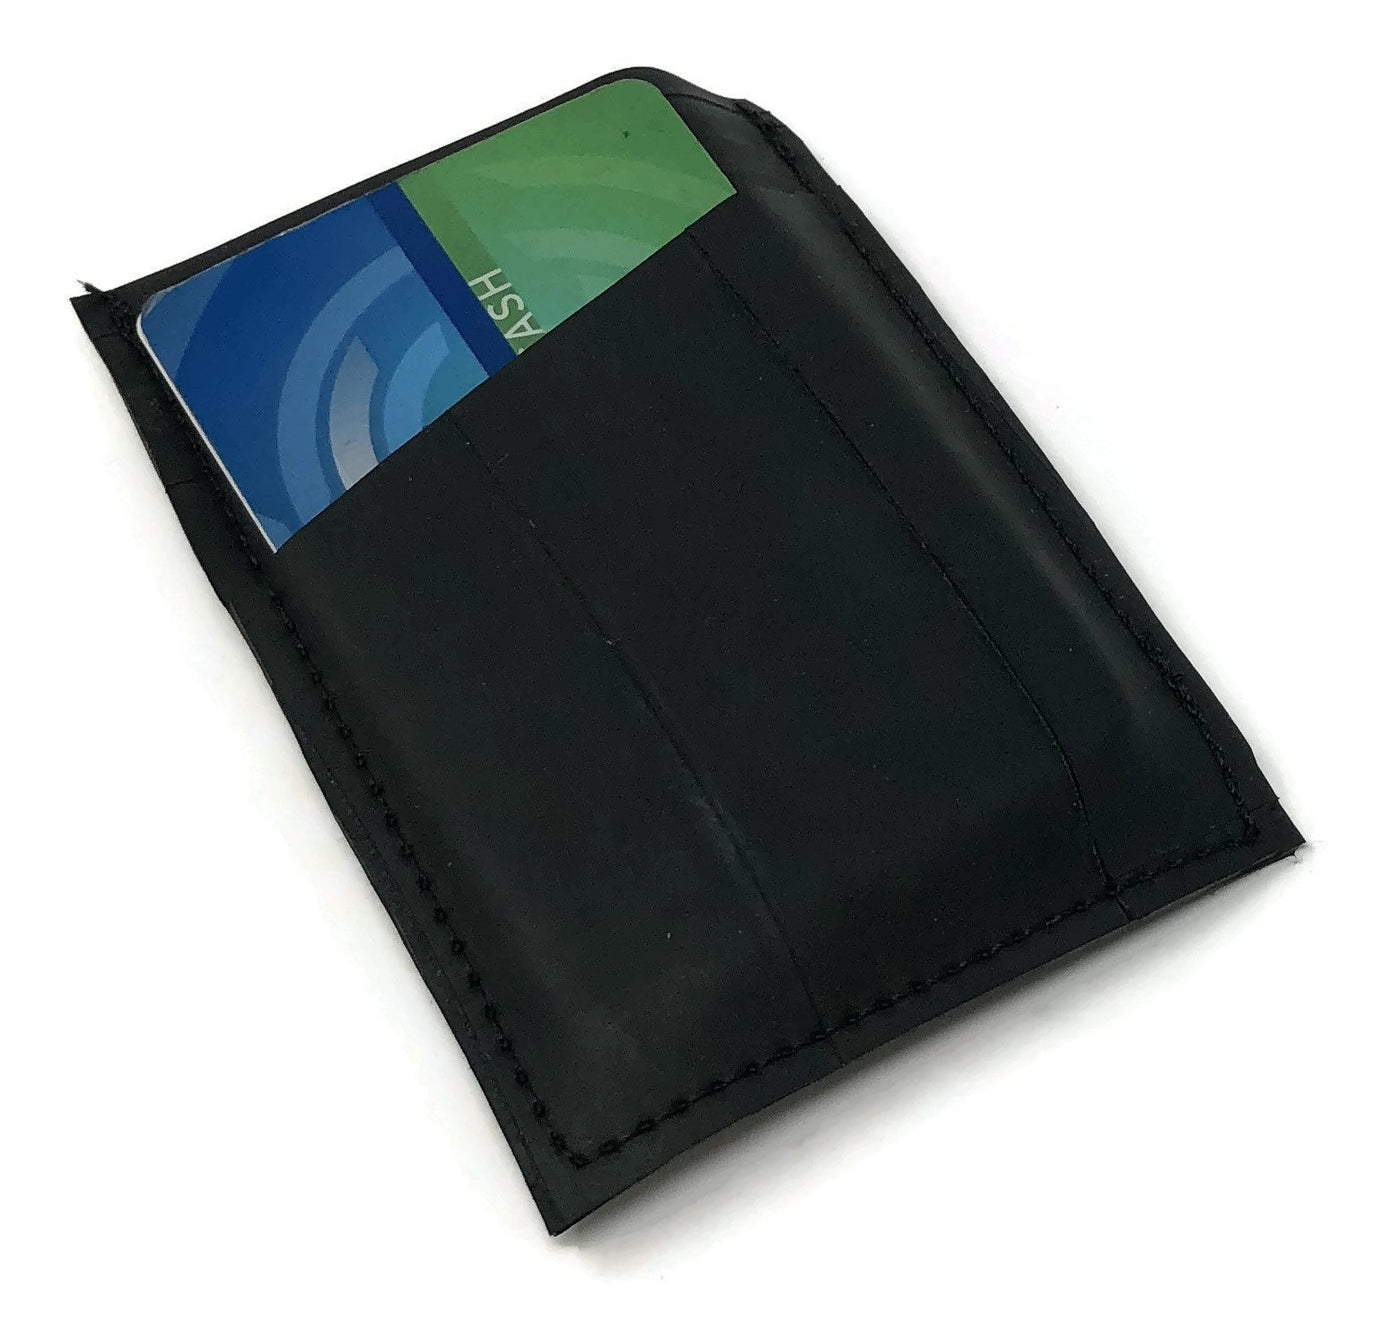 PMF RaceDay (tm) Wallet - SHIPS IN ABOUT 3 WEEKS